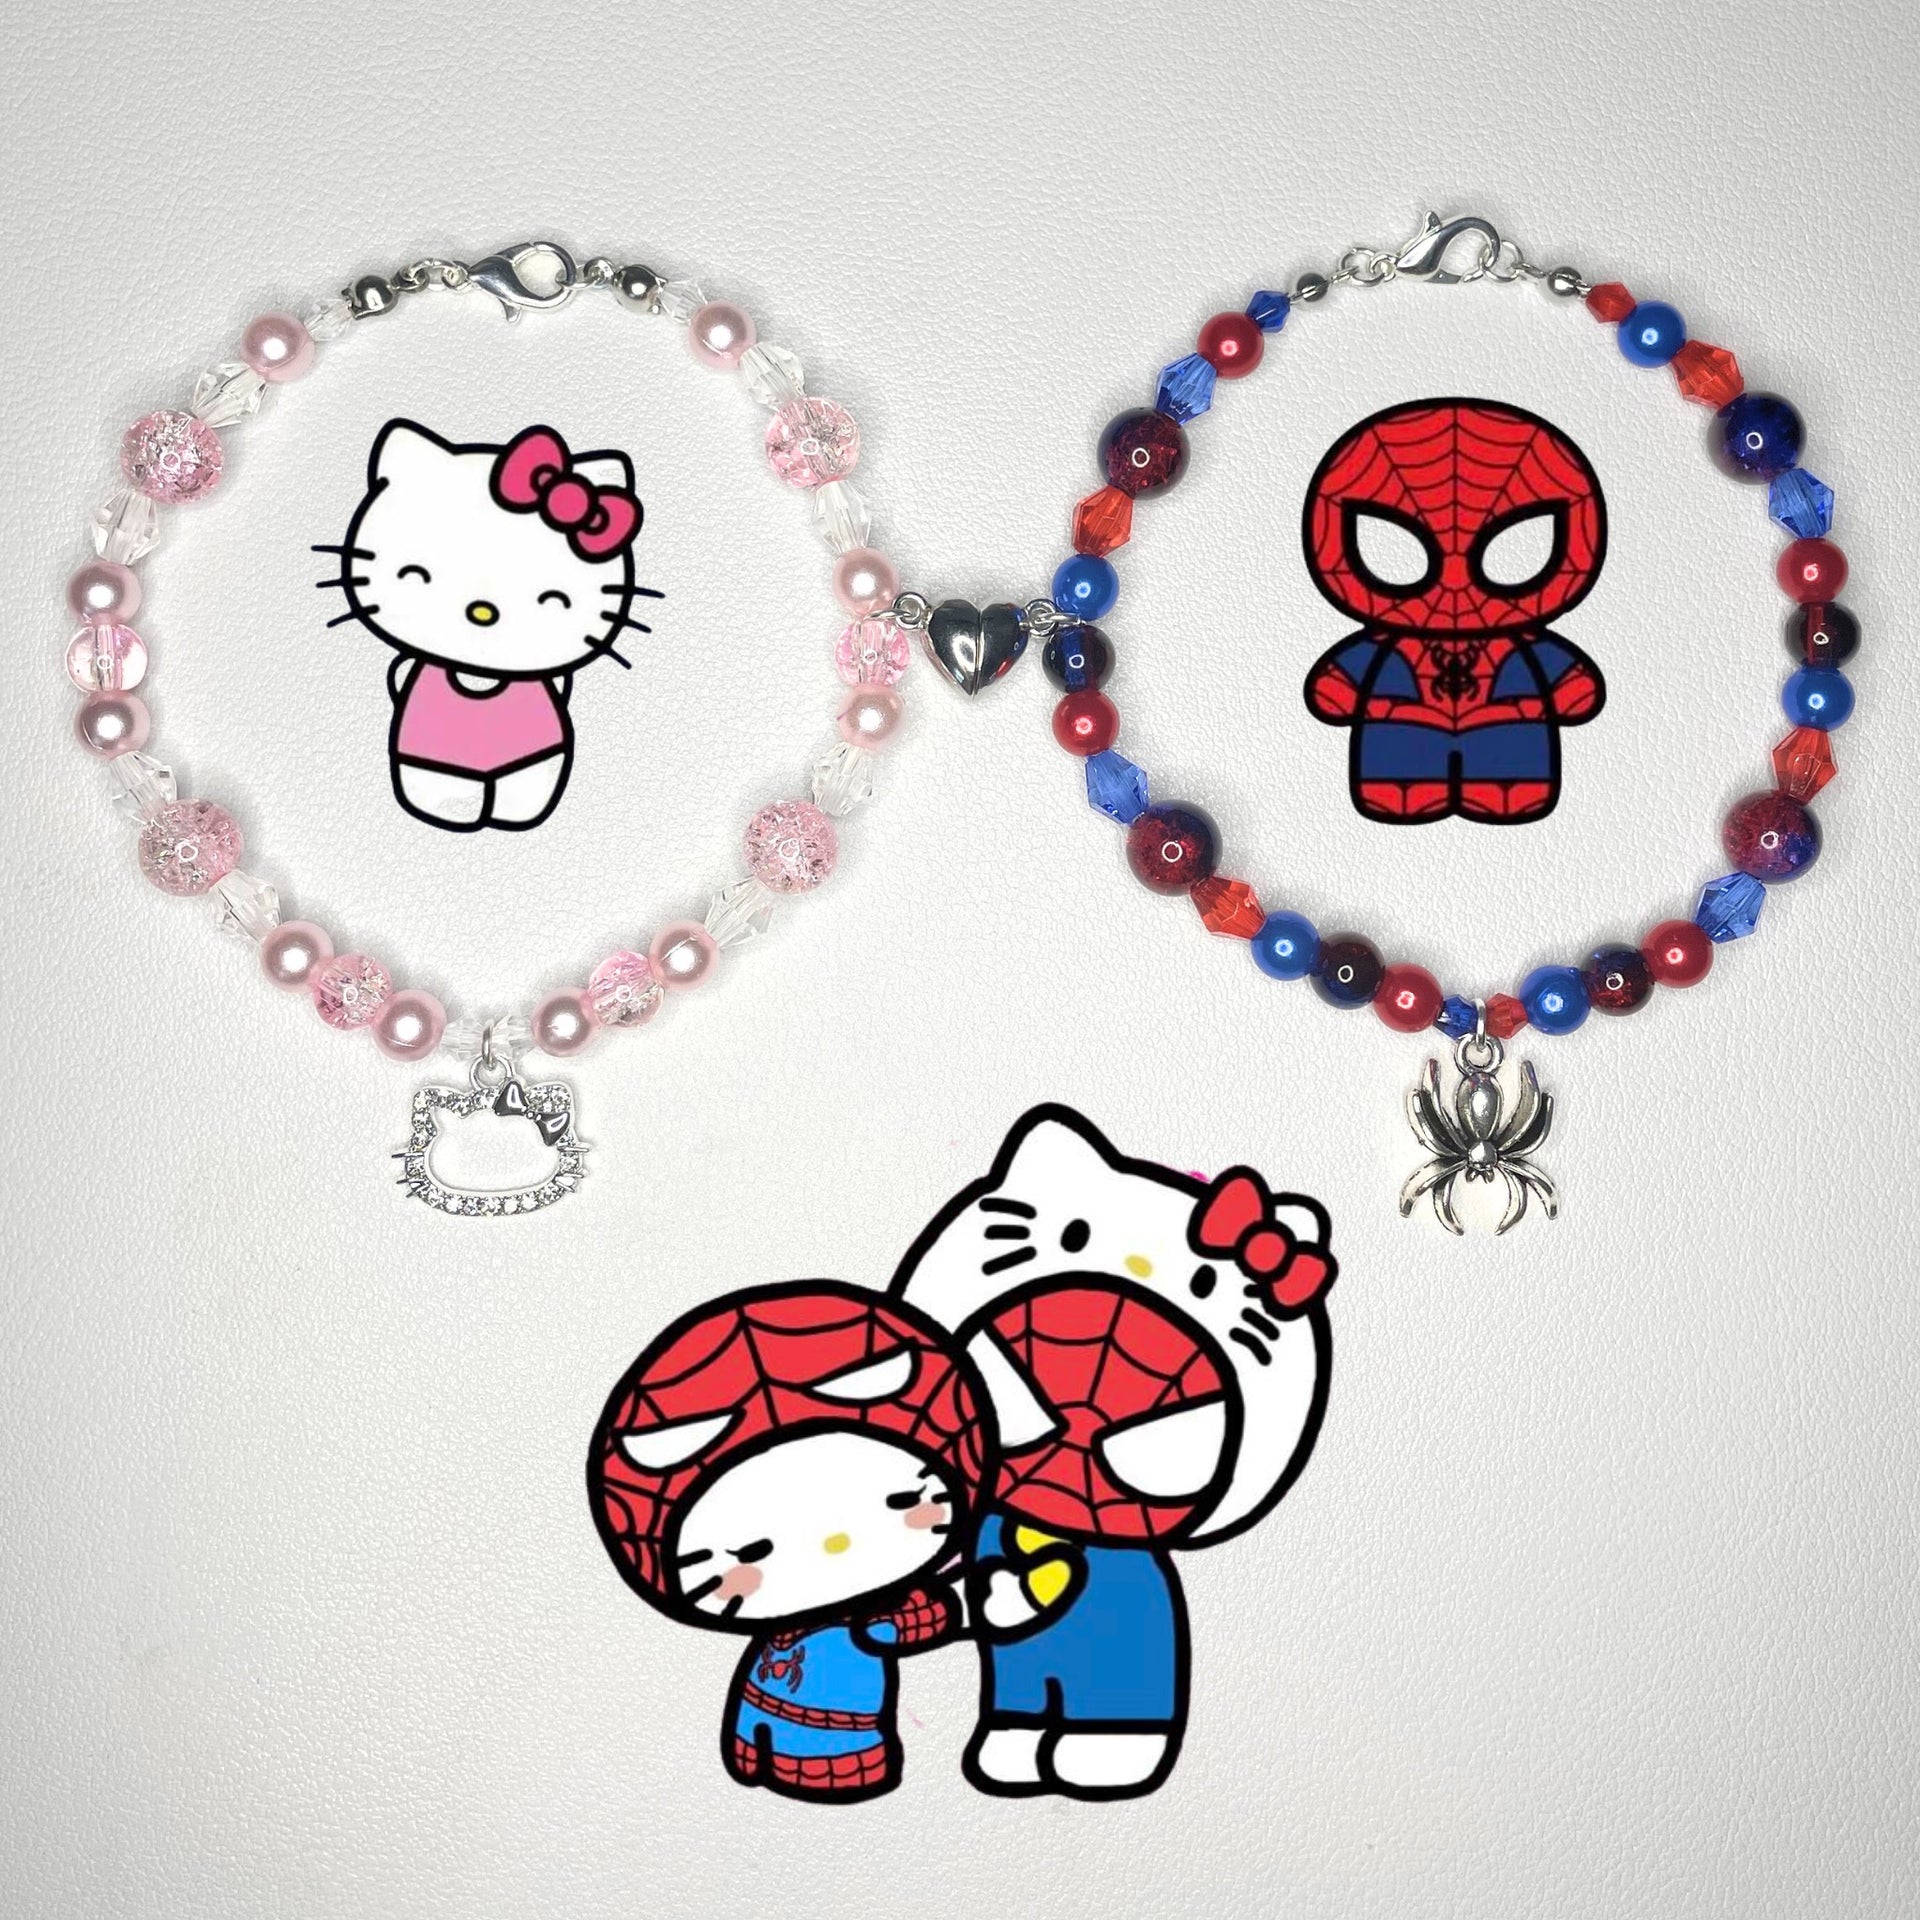 𝖊𝖛𝖊𝖑𝖞𝖓𝖘𝖔𝖗𝖎𝖌𝖎𝖓𝖆𝖑💘 on Instagram: Hello Kitty X Spider Man  🎀🕷️ Now Available🩷! Link In Bio To Shop🛍️ Handmade With 925 Sterling  Silver Beads, Every Order Gets FREE Candy & A FREE Cleaning Cloth